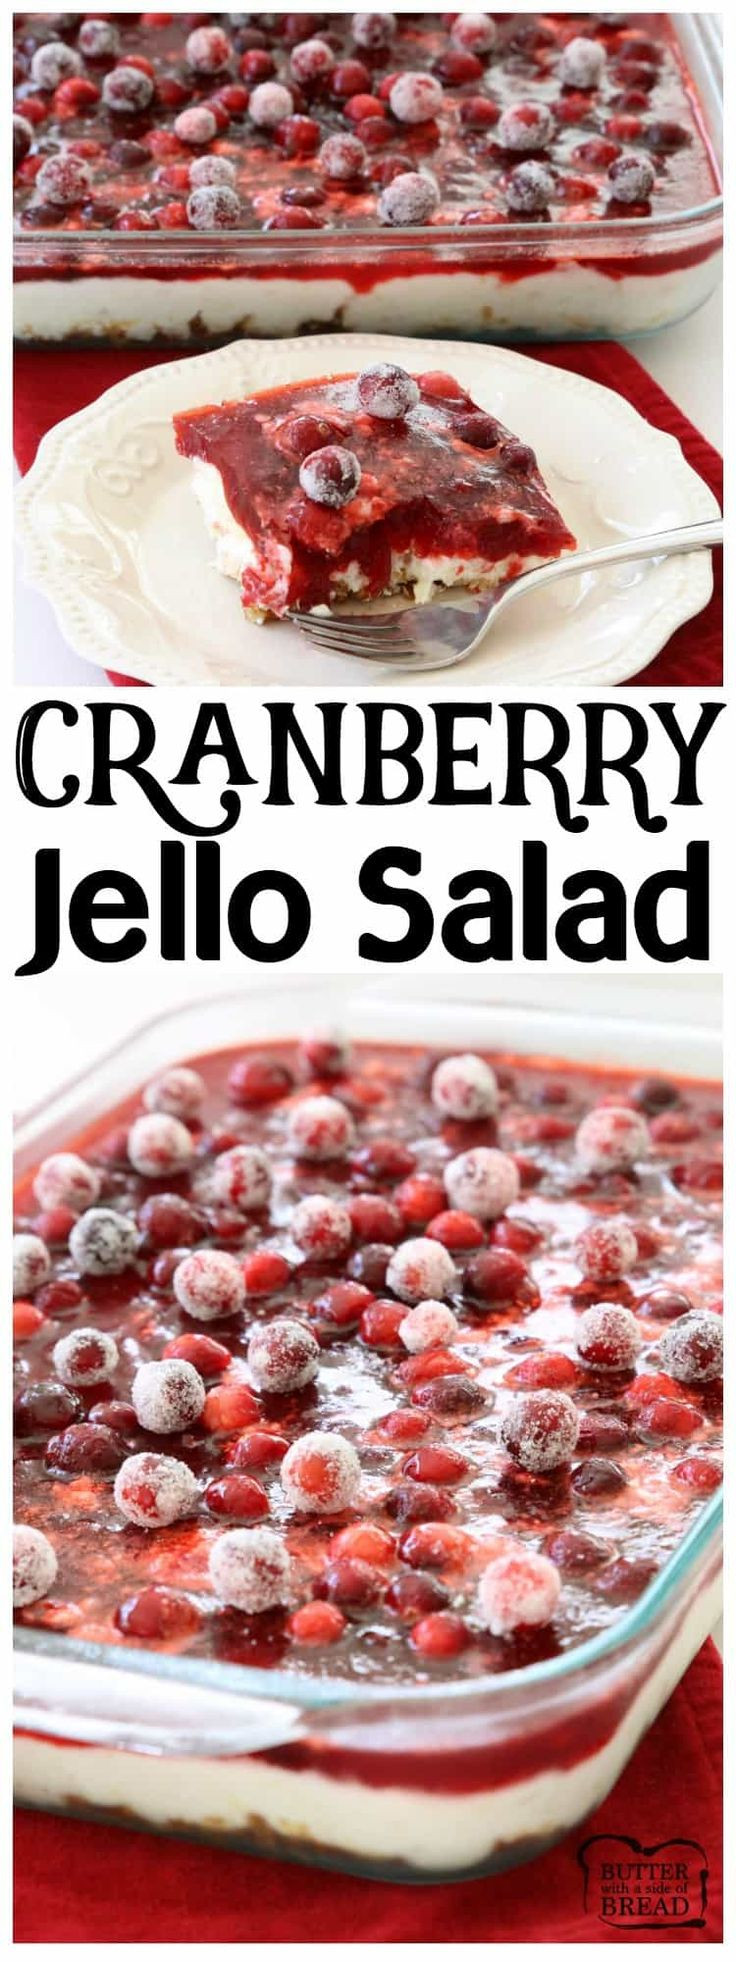 Jello Salads For Thanksgiving Dinner
 179 best Jello & Instant Pudding Recipes images on